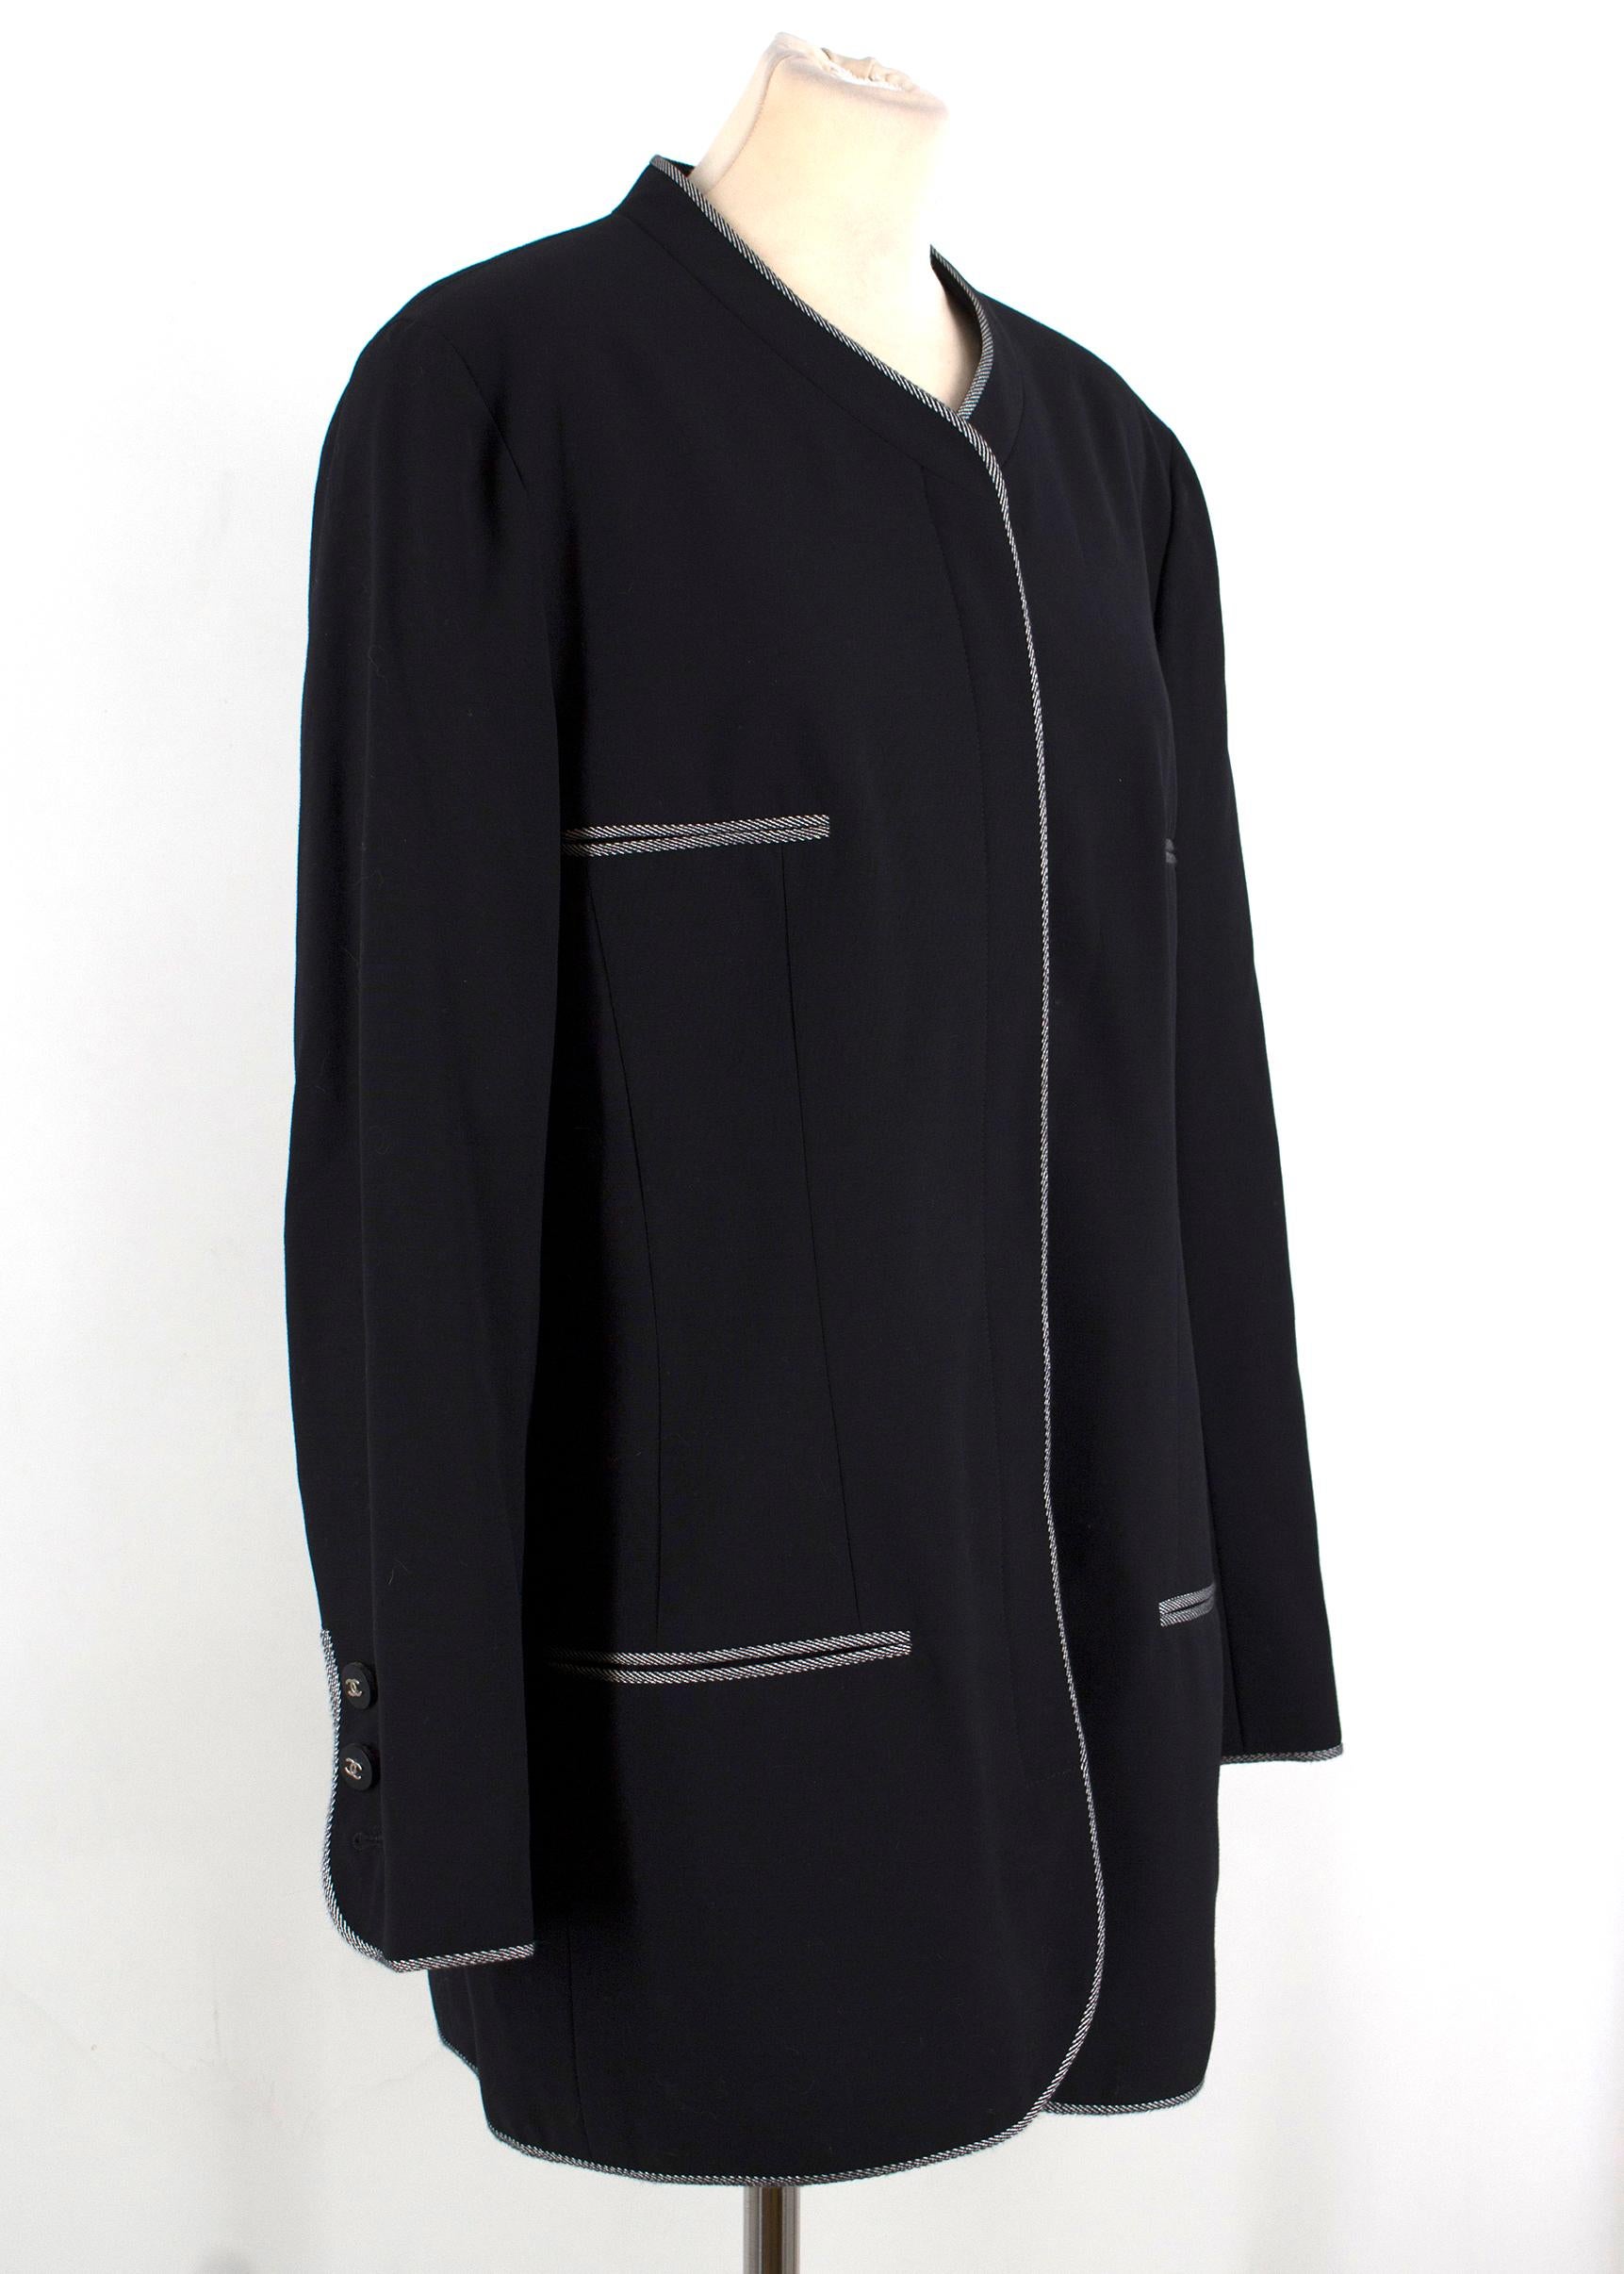 Chanel Boutique Collarless Wool Blazer

- 100% wool 
- Collarless
- Concealed button front fastening
- Contrast stitching around neckline down to the hems, sleeve cuffs and pocket openings
- Exposed buttoned cuffs with black plastic buttons embossed